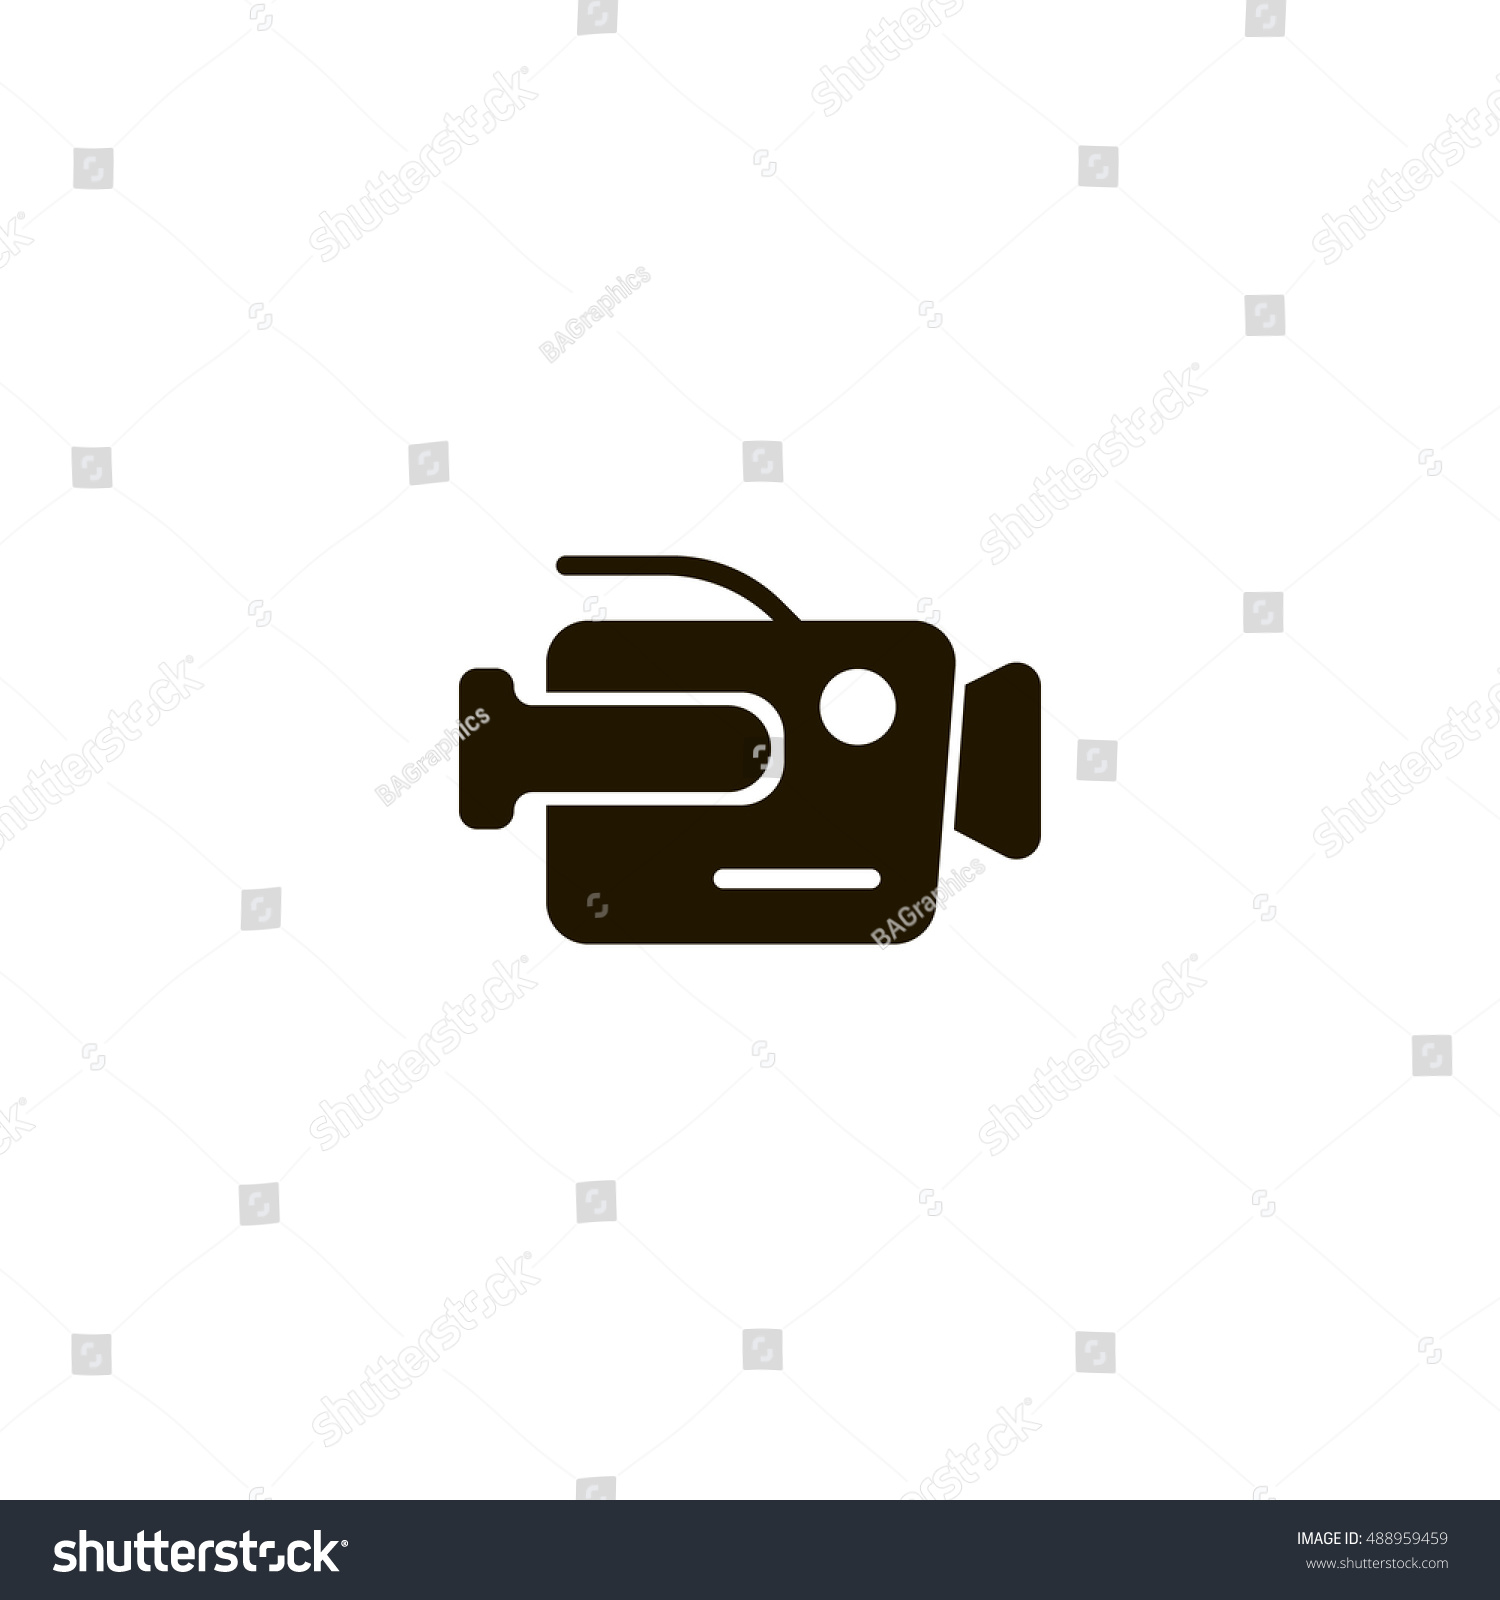 SVG of Camera icon vector, clip art. Also useful as logo, web element, symbol, graphic image, silhouette and illustration. Compatible with ai, cdr, jpg, png, svg, pdf, ico and eps. svg